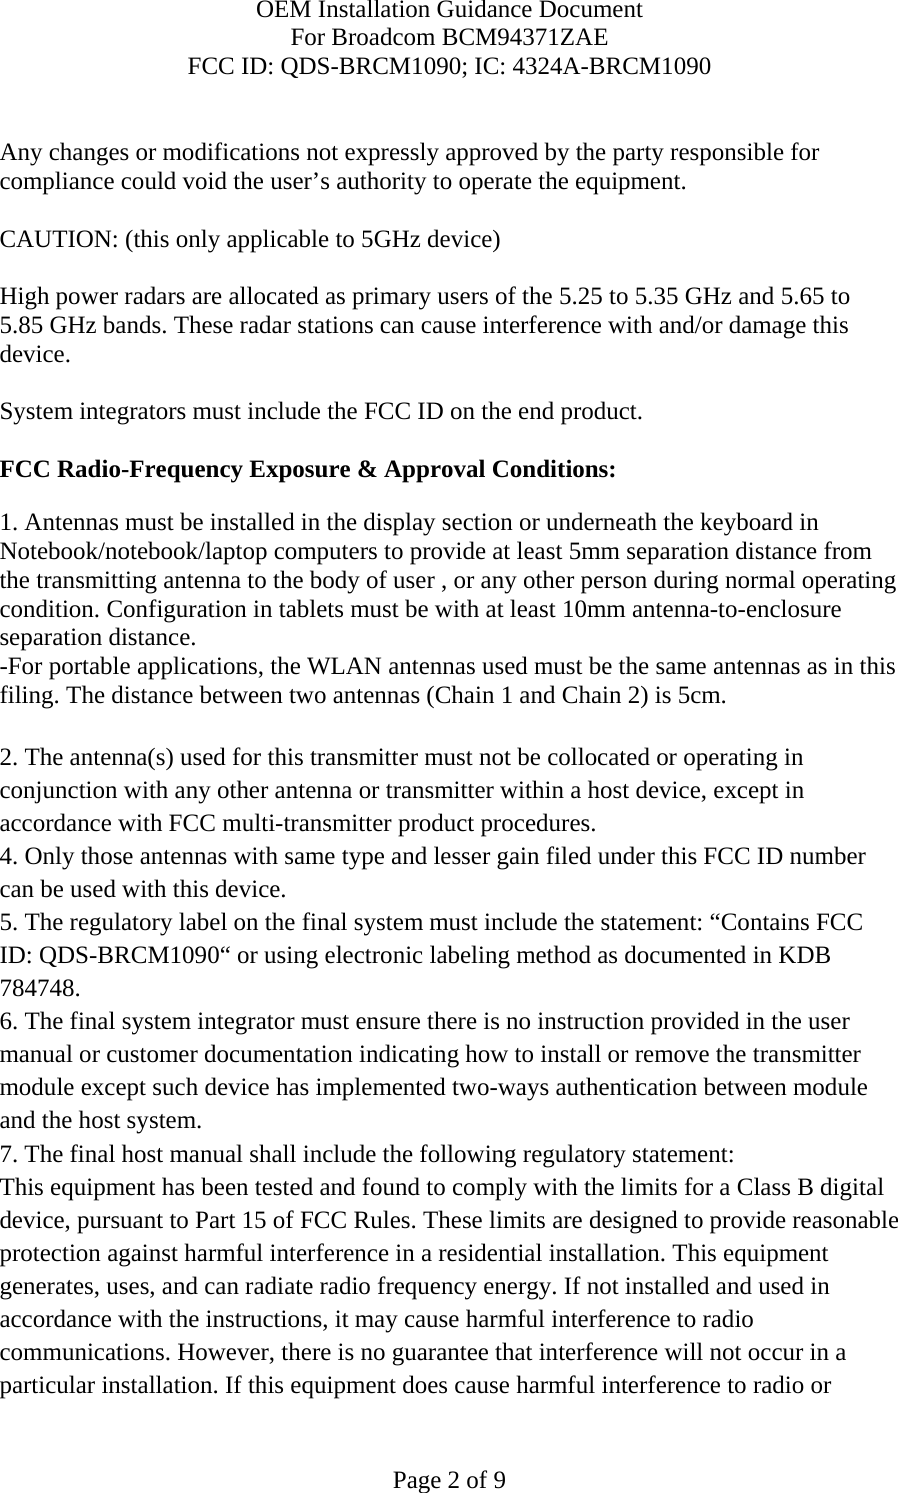 OEM Installation Guidance Document For Broadcom BCM94371ZAE FCC ID: QDS-BRCM1090; IC: 4324A-BRCM1090  Page 2 of 9  Any changes or modifications not expressly approved by the party responsible for compliance could void the user’s authority to operate the equipment.  CAUTION: (this only applicable to 5GHz device)  High power radars are allocated as primary users of the 5.25 to 5.35 GHz and 5.65 to 5.85 GHz bands. These radar stations can cause interference with and/or damage this device.  System integrators must include the FCC ID on the end product.   FCC Radio-Frequency Exposure &amp; Approval Conditions: 1. Antennas must be installed in the display section or underneath the keyboard in Notebook/notebook/laptop computers to provide at least 5mm separation distance from the transmitting antenna to the body of user , or any other person during normal operating condition. Configuration in tablets must be with at least 10mm antenna-to-enclosure separation distance. -For portable applications, the WLAN antennas used must be the same antennas as in this filing. The distance between two antennas (Chain 1 and Chain 2) is 5cm.  2. The antenna(s) used for this transmitter must not be collocated or operating in conjunction with any other antenna or transmitter within a host device, except in accordance with FCC multi-transmitter product procedures. 4. Only those antennas with same type and lesser gain filed under this FCC ID number can be used with this device. 5. The regulatory label on the final system must include the statement: “Contains FCC ID: QDS-BRCM1090“ or using electronic labeling method as documented in KDB 784748. 6. The final system integrator must ensure there is no instruction provided in the user manual or customer documentation indicating how to install or remove the transmitter module except such device has implemented two-ways authentication between module and the host system. 7. The final host manual shall include the following regulatory statement: This equipment has been tested and found to comply with the limits for a Class B digital device, pursuant to Part 15 of FCC Rules. These limits are designed to provide reasonable protection against harmful interference in a residential installation. This equipment generates, uses, and can radiate radio frequency energy. If not installed and used in accordance with the instructions, it may cause harmful interference to radio communications. However, there is no guarantee that interference will not occur in a particular installation. If this equipment does cause harmful interference to radio or 